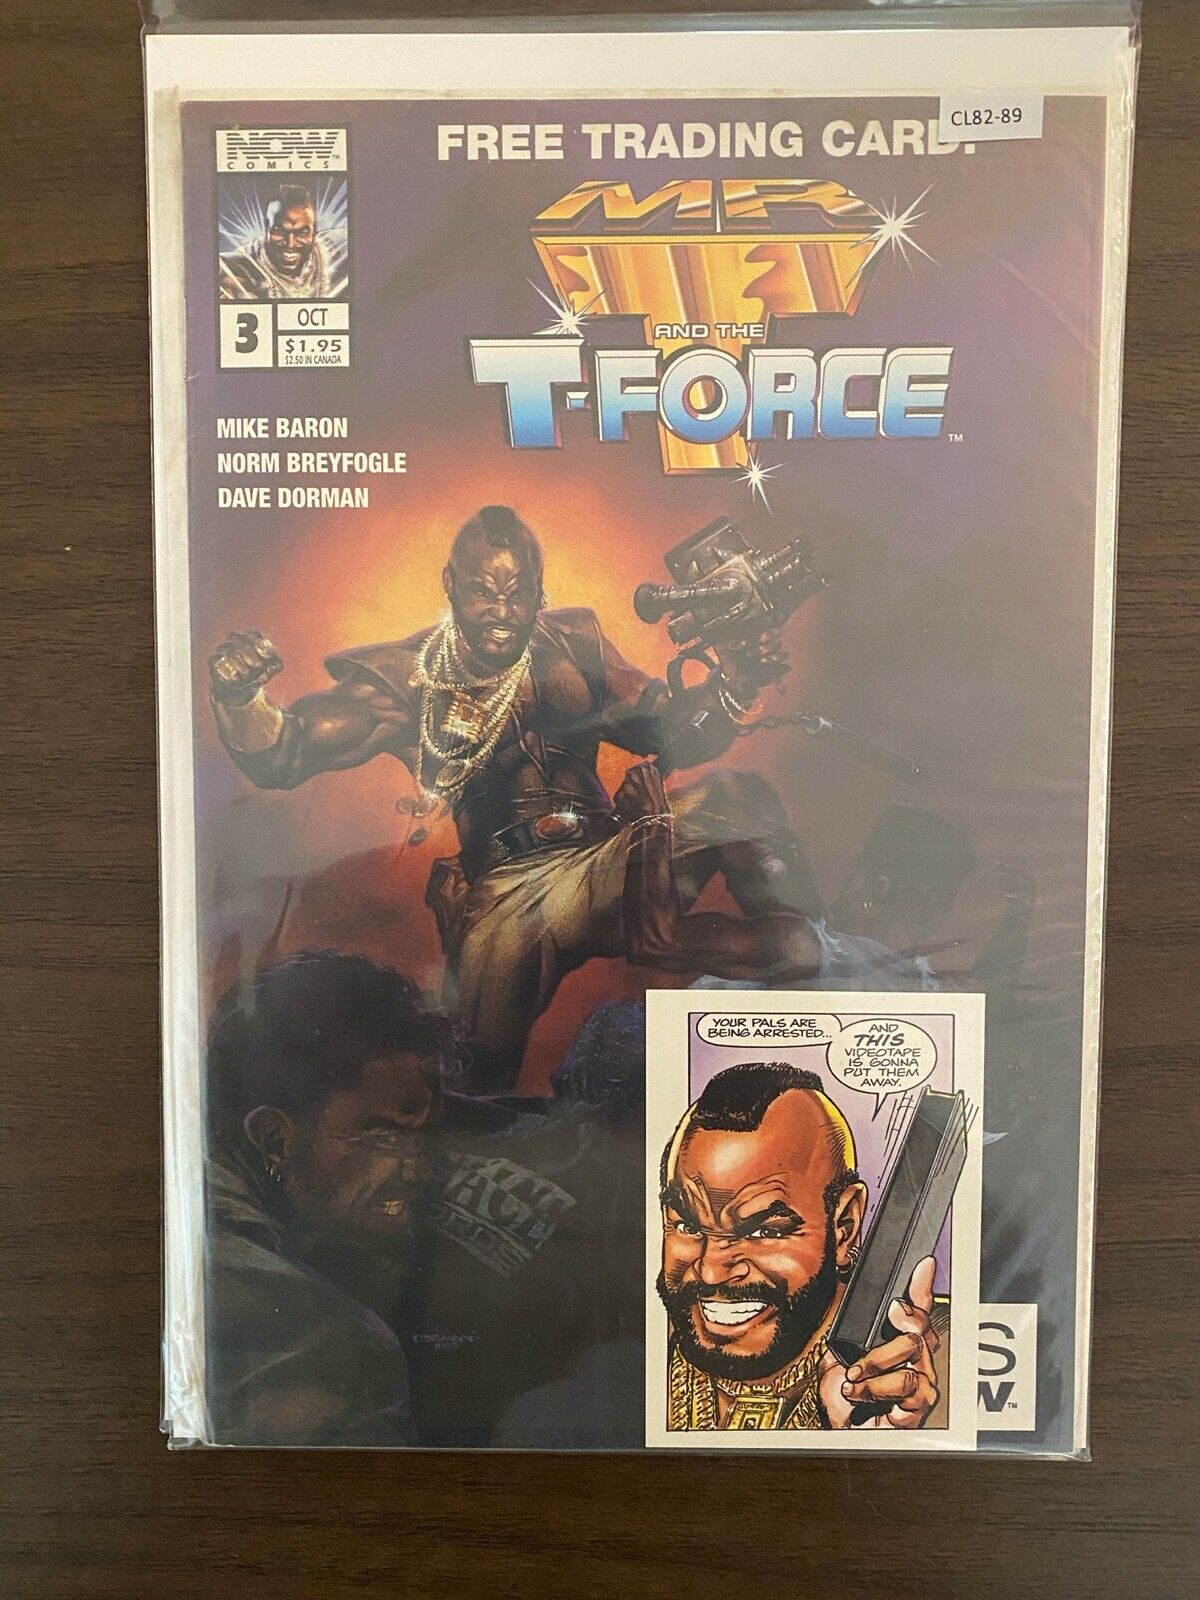 Mr. T and the T-Force 3 w/ Card Sealed High Grade Now Comic CL82-89